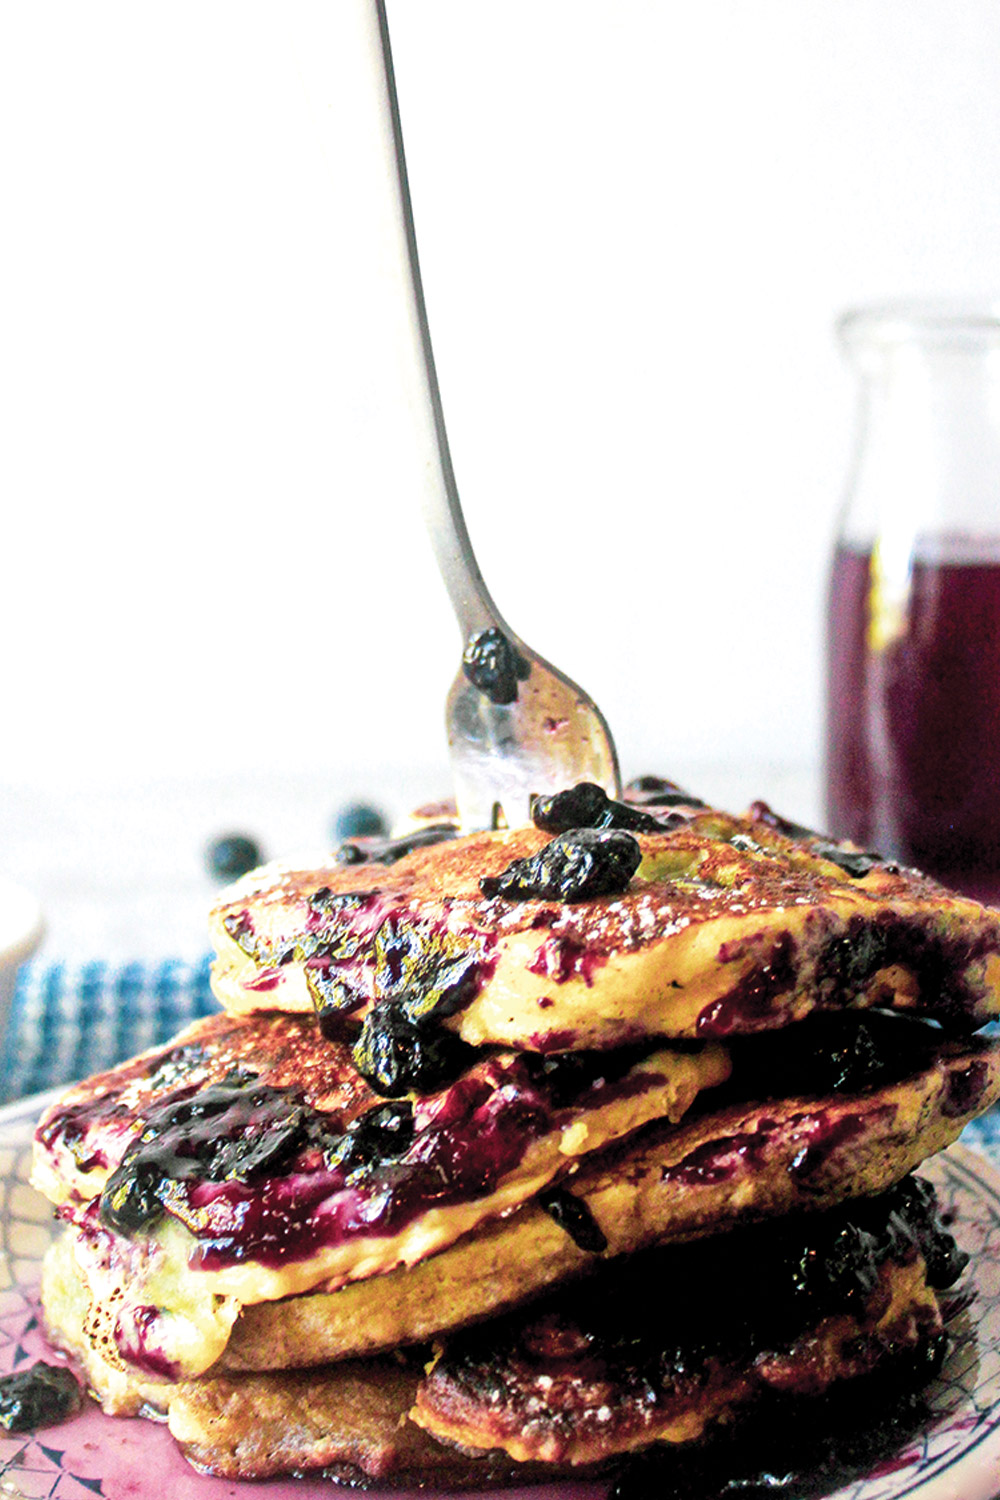 Blueberry pancake stack dripping with blueberries and jam syrup with a fork stuck upright in the top